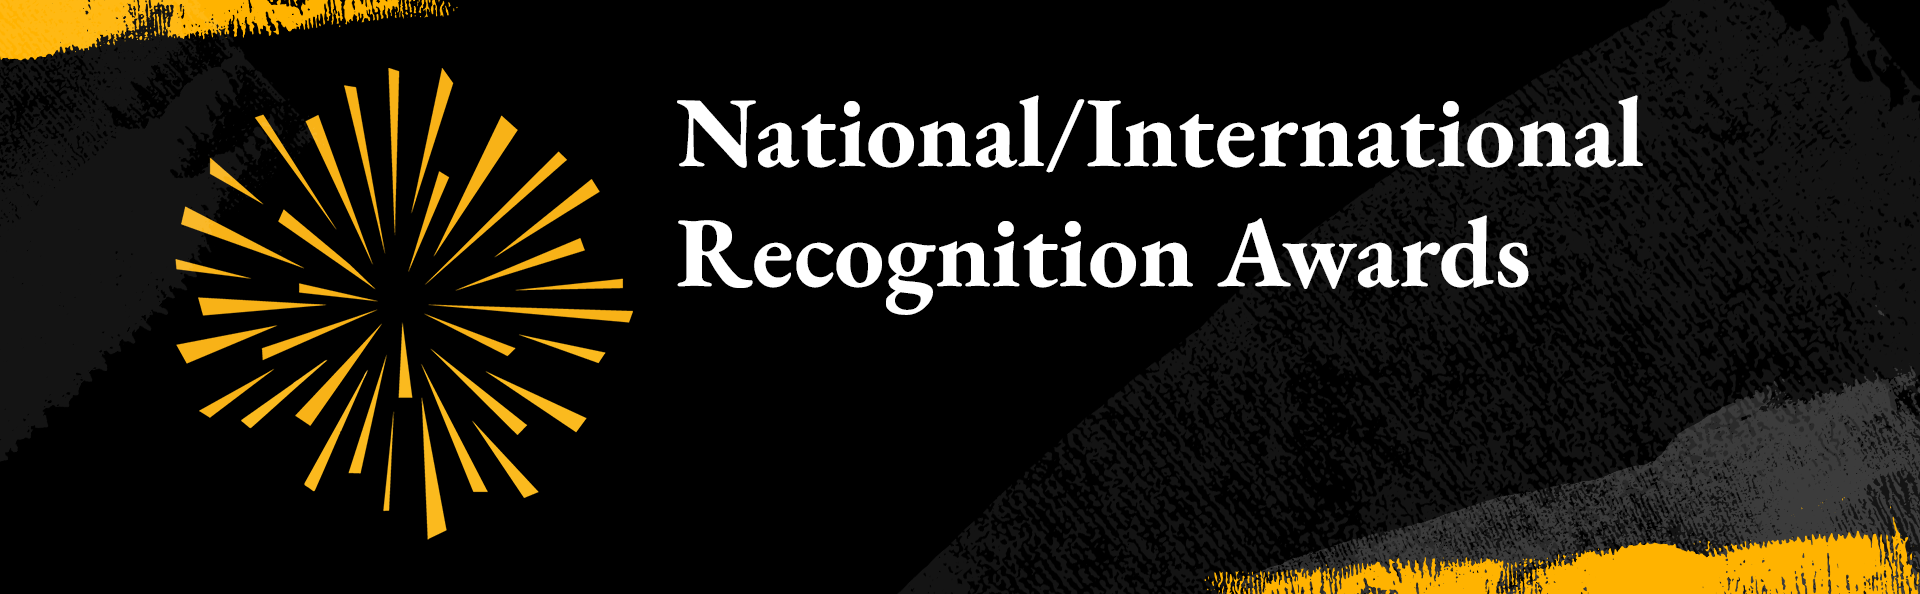 National/International Recognition Awards for VCU Faculty